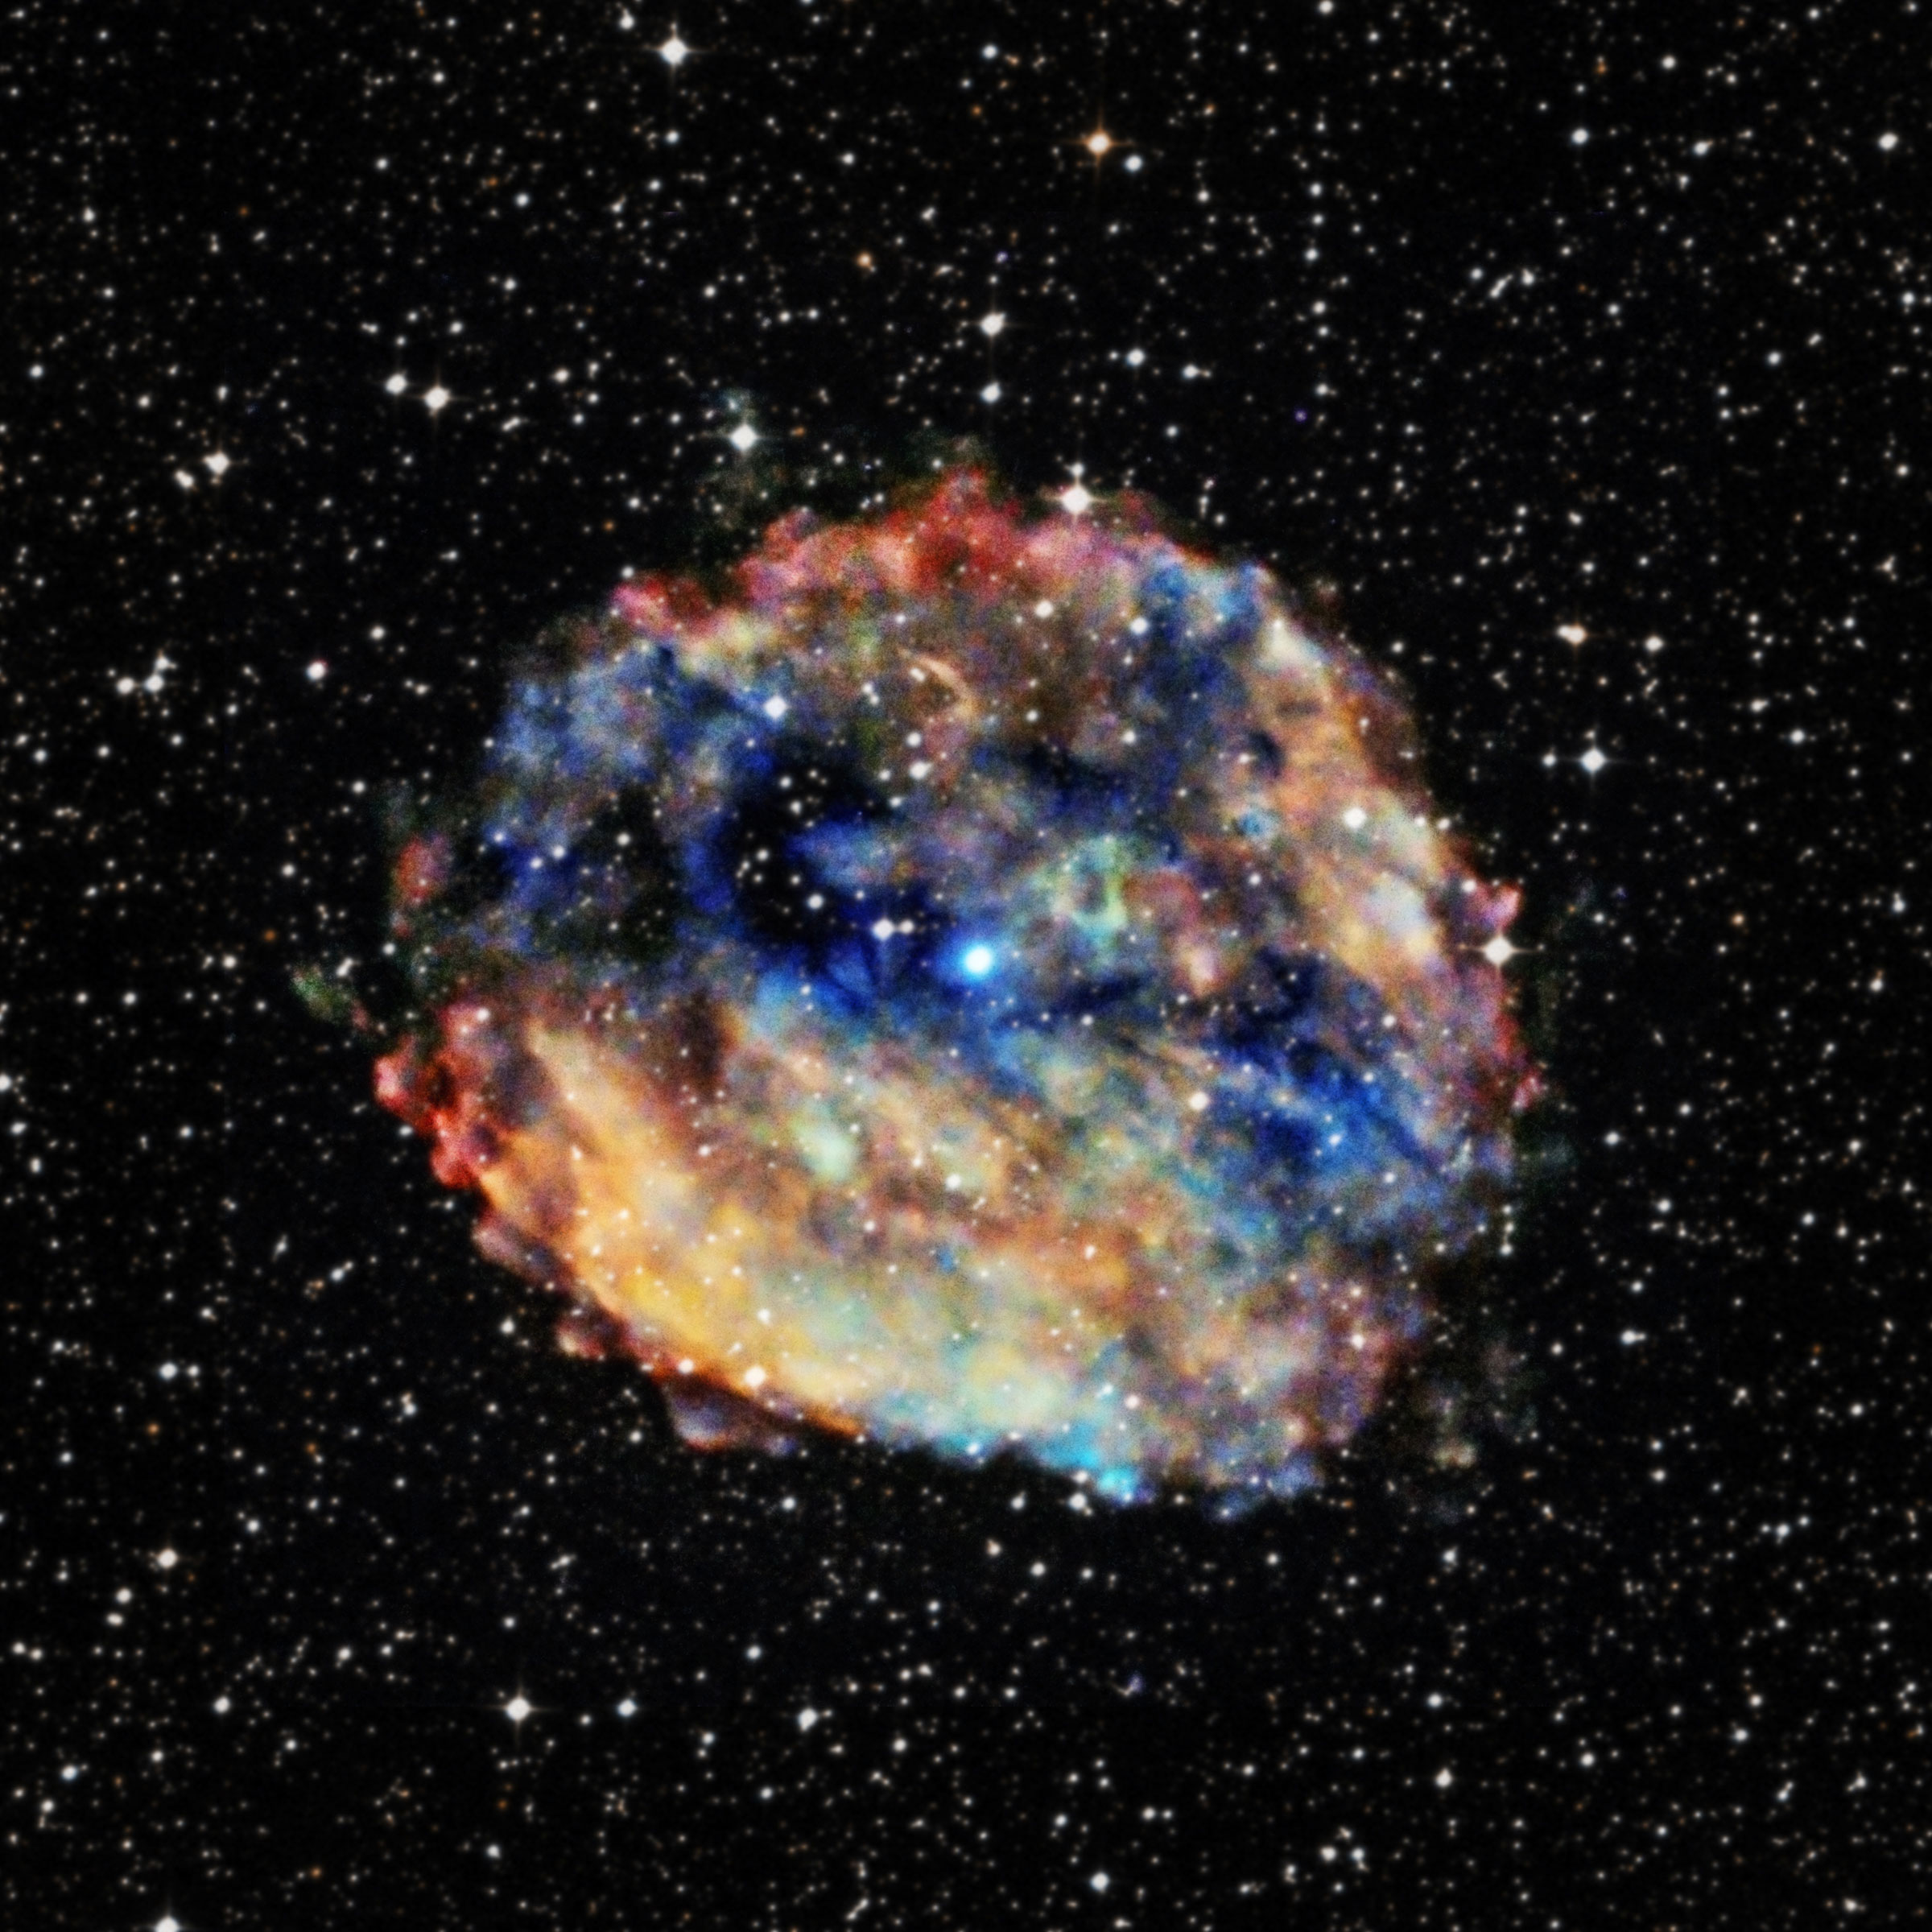 Astronomers Detect Young Magnetar in Supernova Remnant, Likely the Slowest Pulsar Ever Discovered